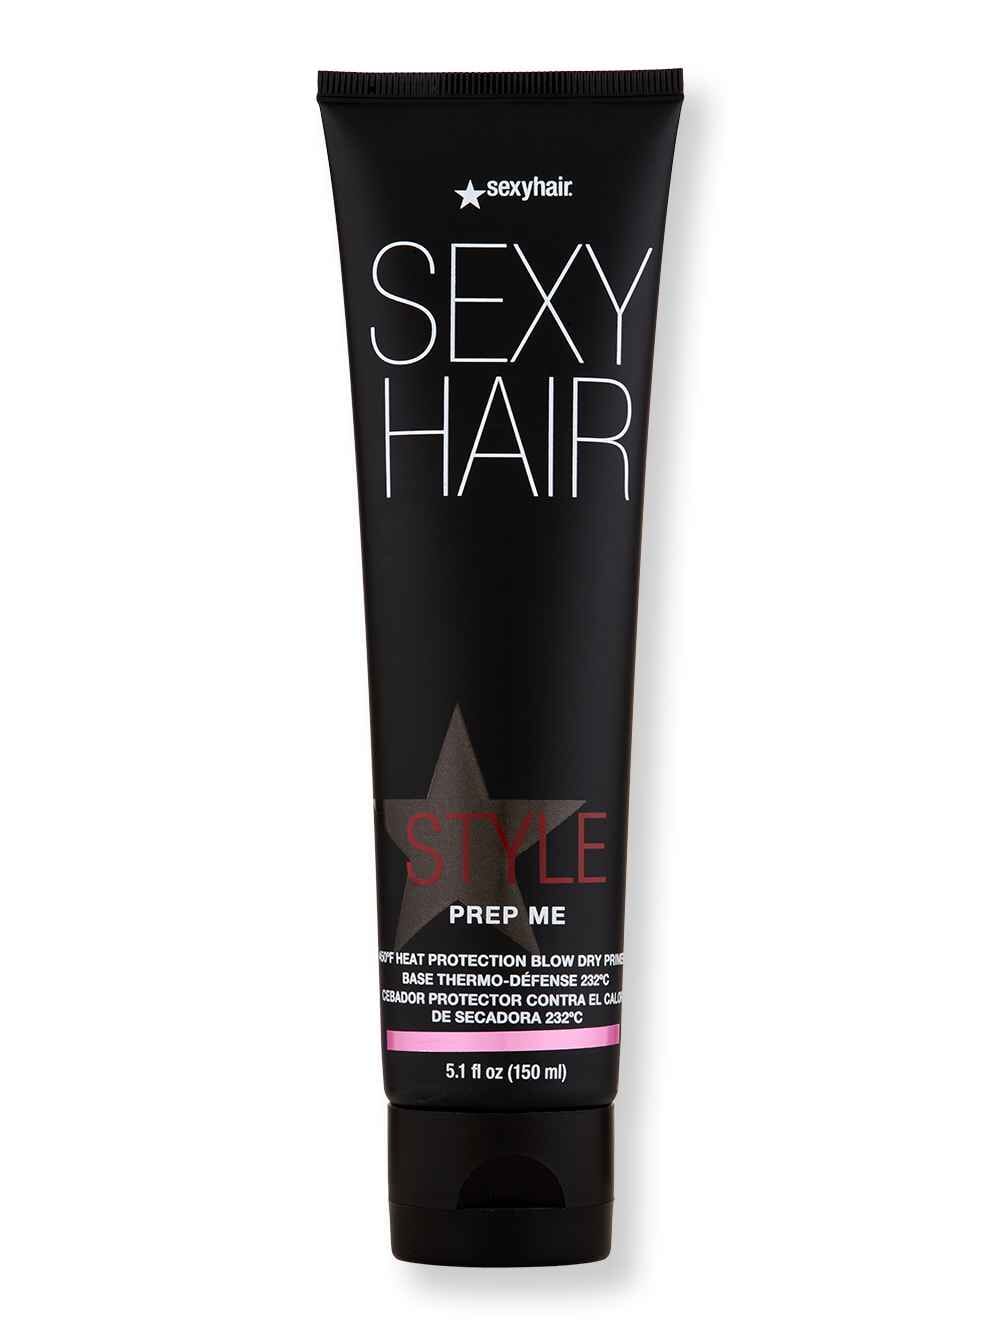 Sexy Hair Sexy Hair Hot Sexy Hair Prep Me 450 Heat Protection Blow Dry Primer 5.1 oz175 ml Styling Treatments 